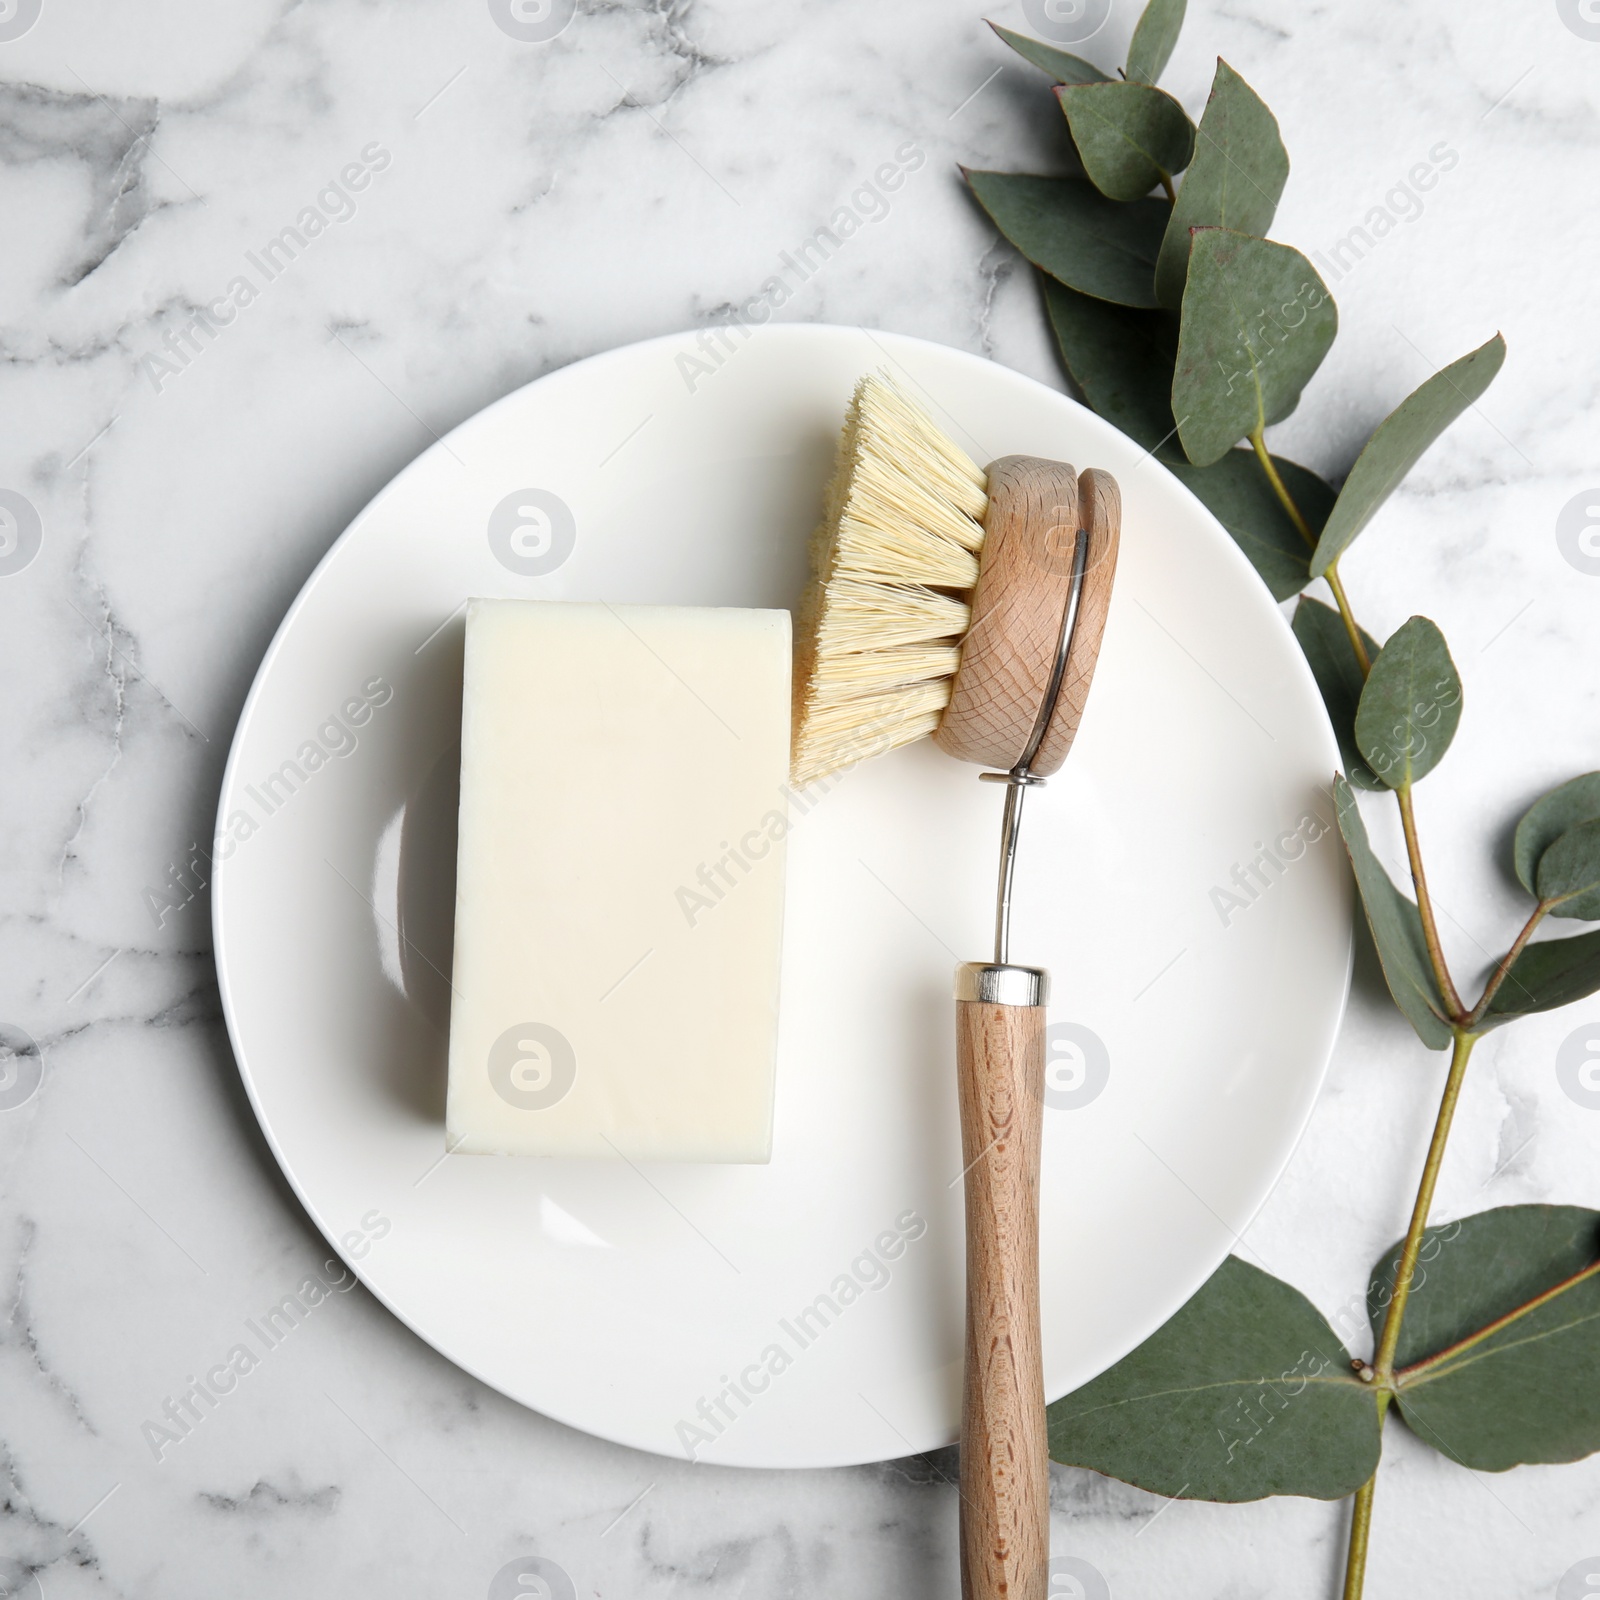 Photo of Cleaning supplies for dish washing, plate and eucalyptus branch on white marble table, flat lay